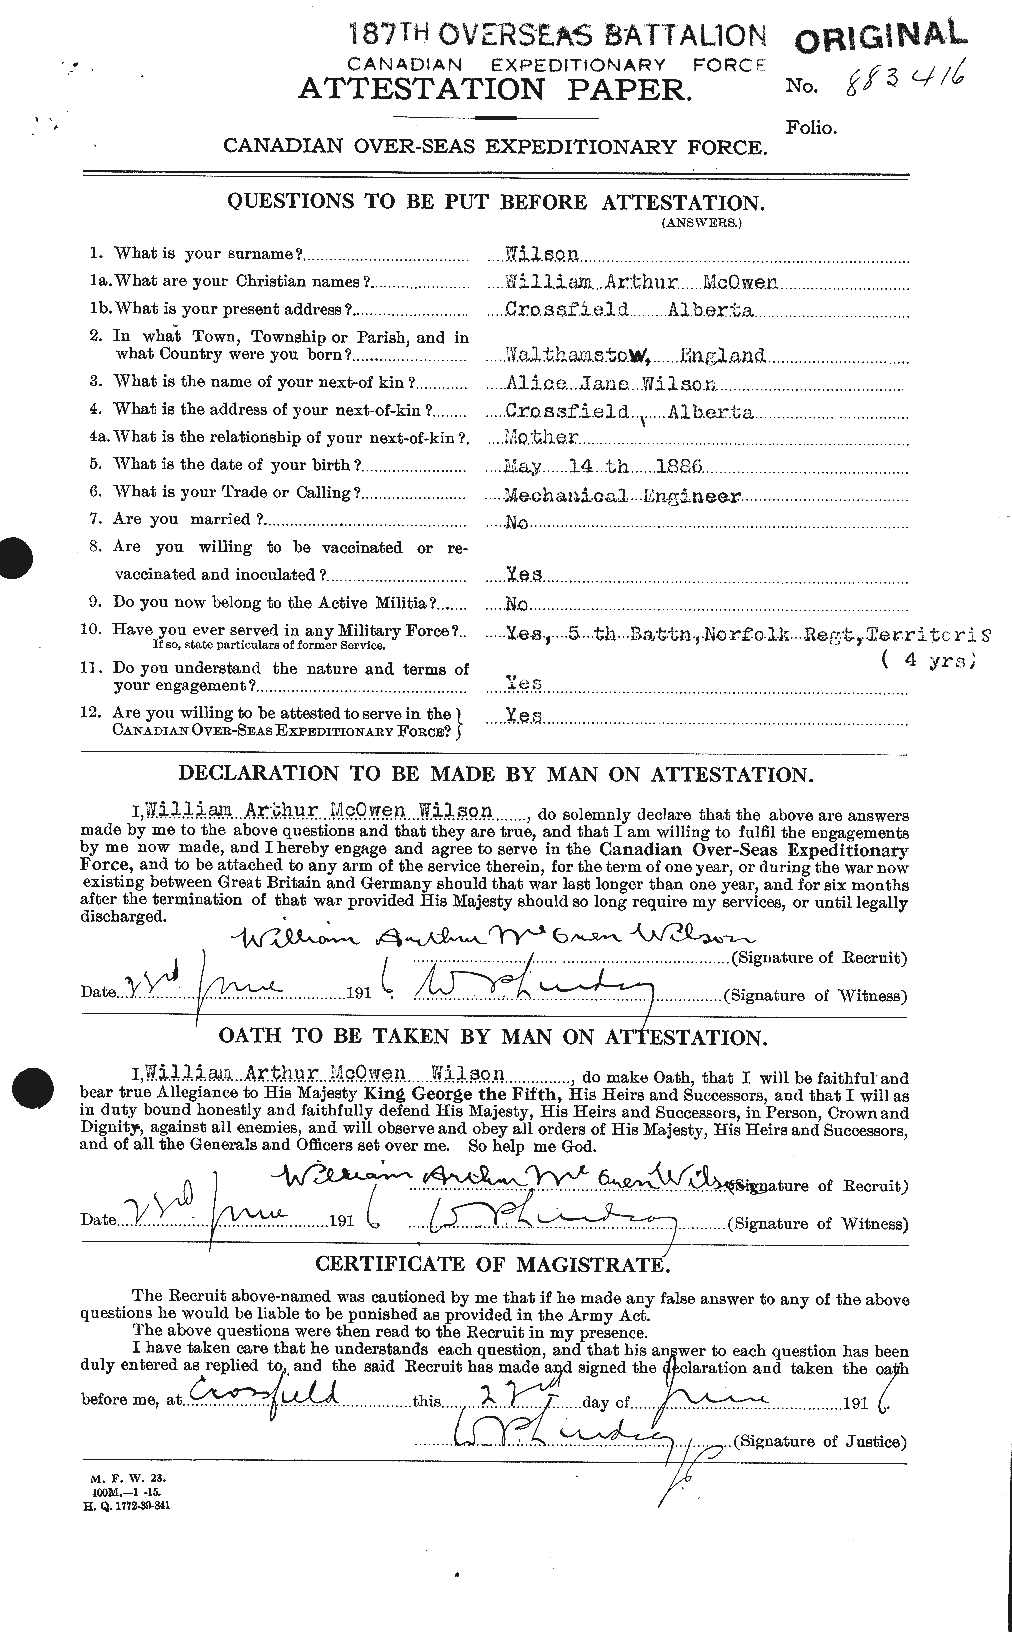 Personnel Records of the First World War - CEF 681935a